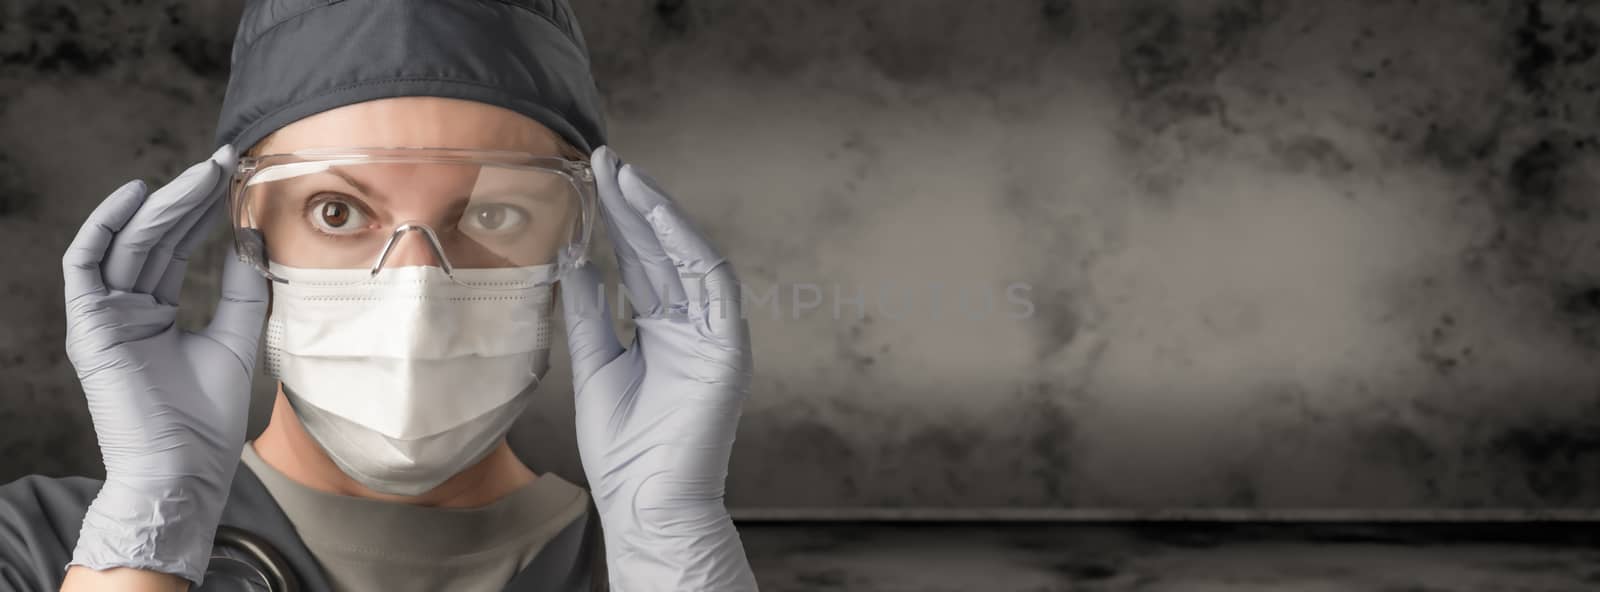 Female Doctor or Nurse Wearing Scrubs, Protective Face Mask and Goggles Banner. by Feverpitched